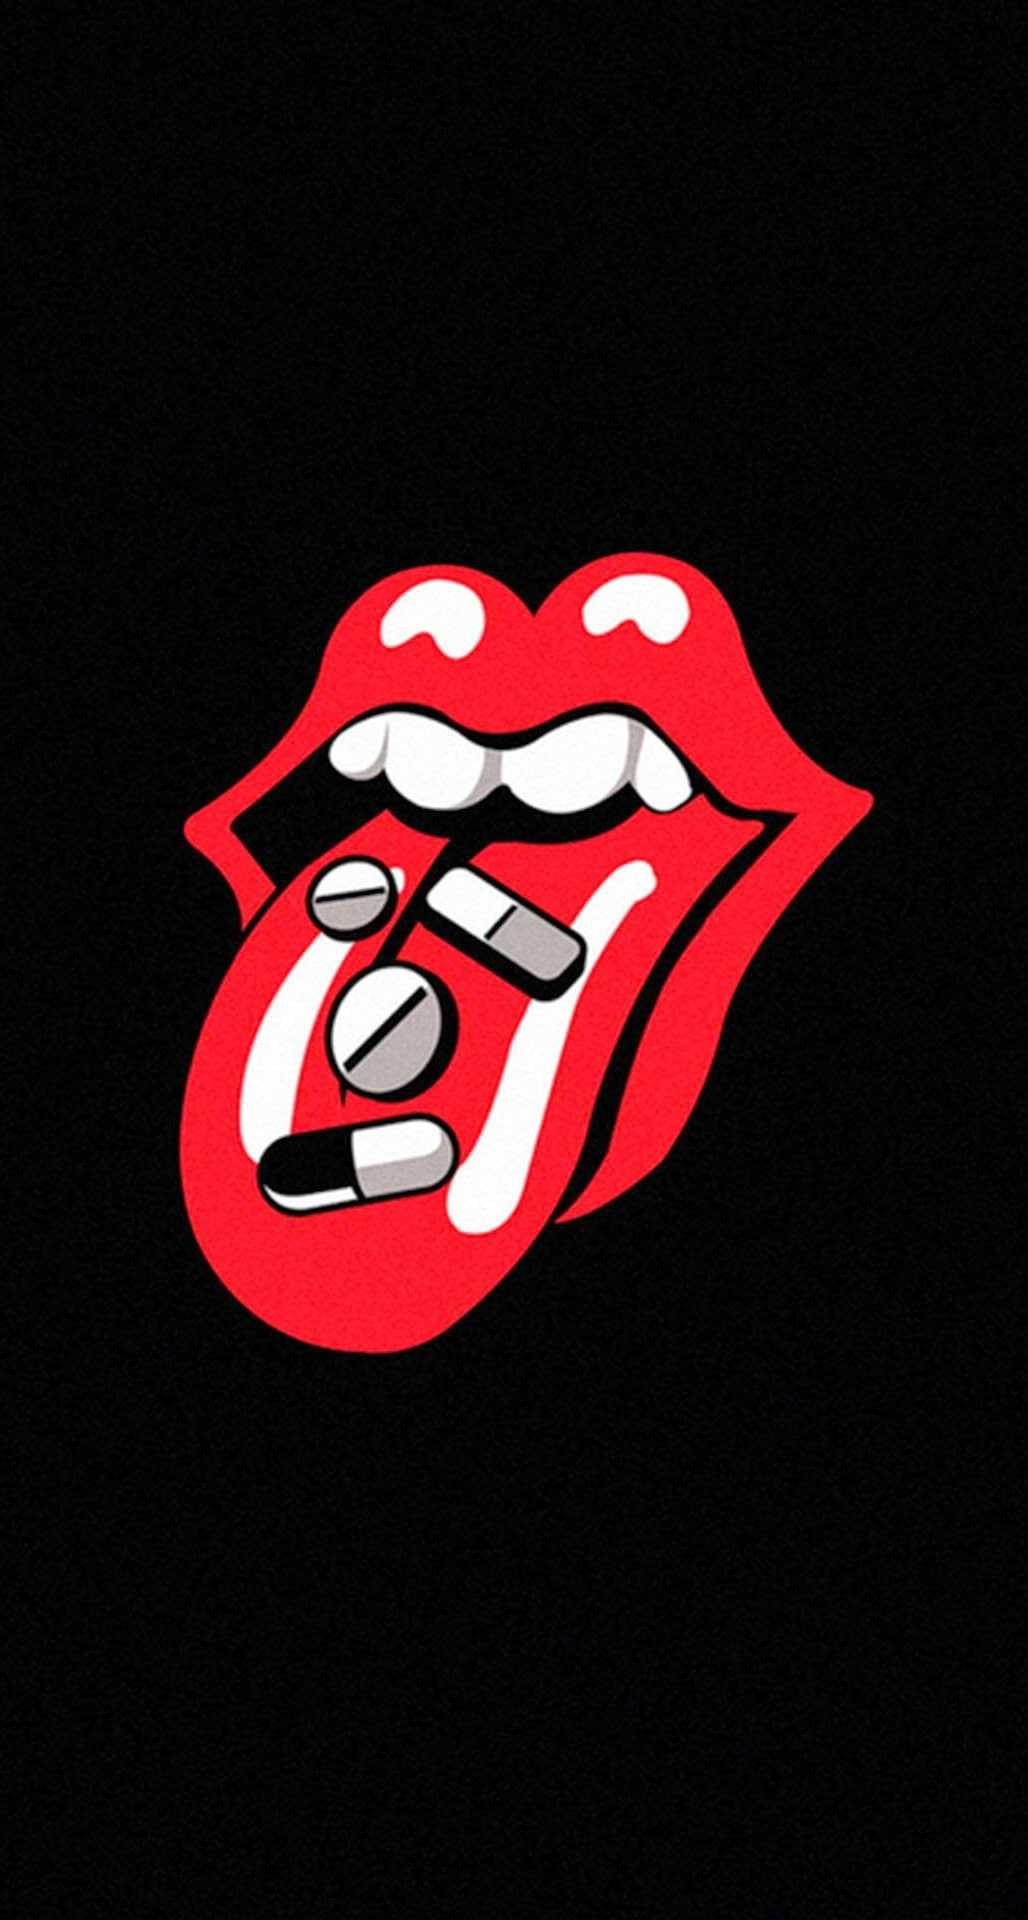 The Rolling Stones Logo With A Red Tongue Wallpaper